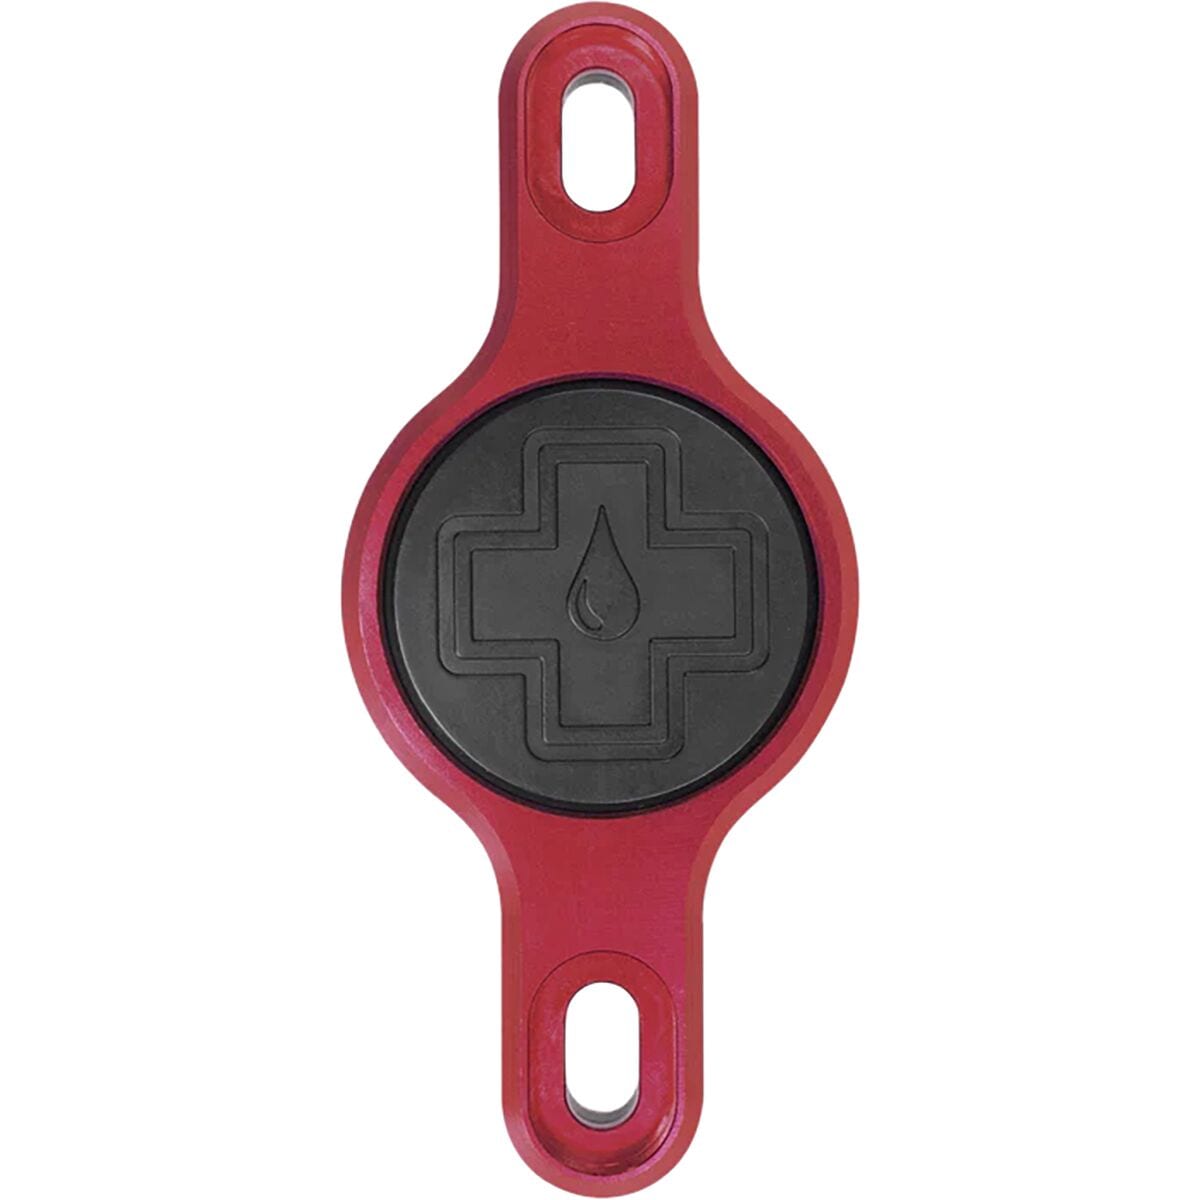 Muc-Off Secure Tag Holder 2.0 Red, One Size